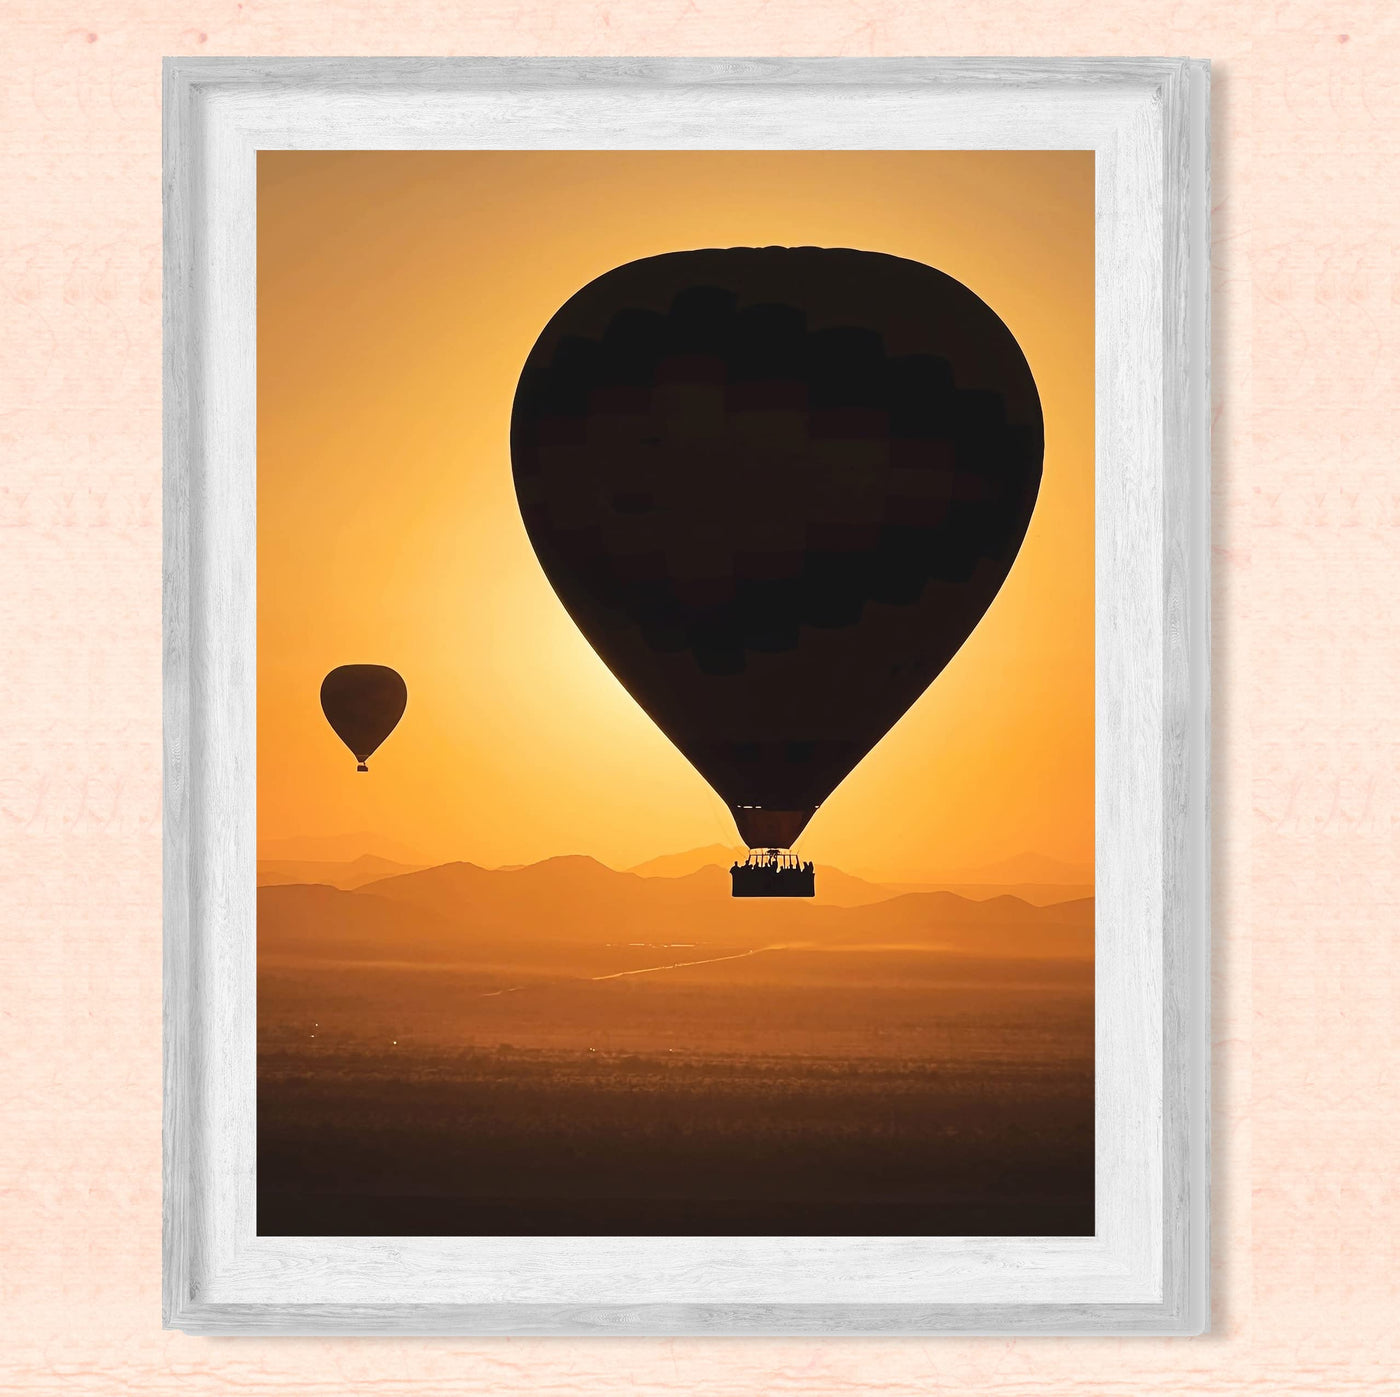 Sunset Hot Air Balloon Ride- Inspirational Wall Art -8 x 10" Balloons Picture Print -Ready to Frame. Perfect Decoration for Home-Office-Studio-Classroom Decor. Great Gift for Flight Enthusiasts!